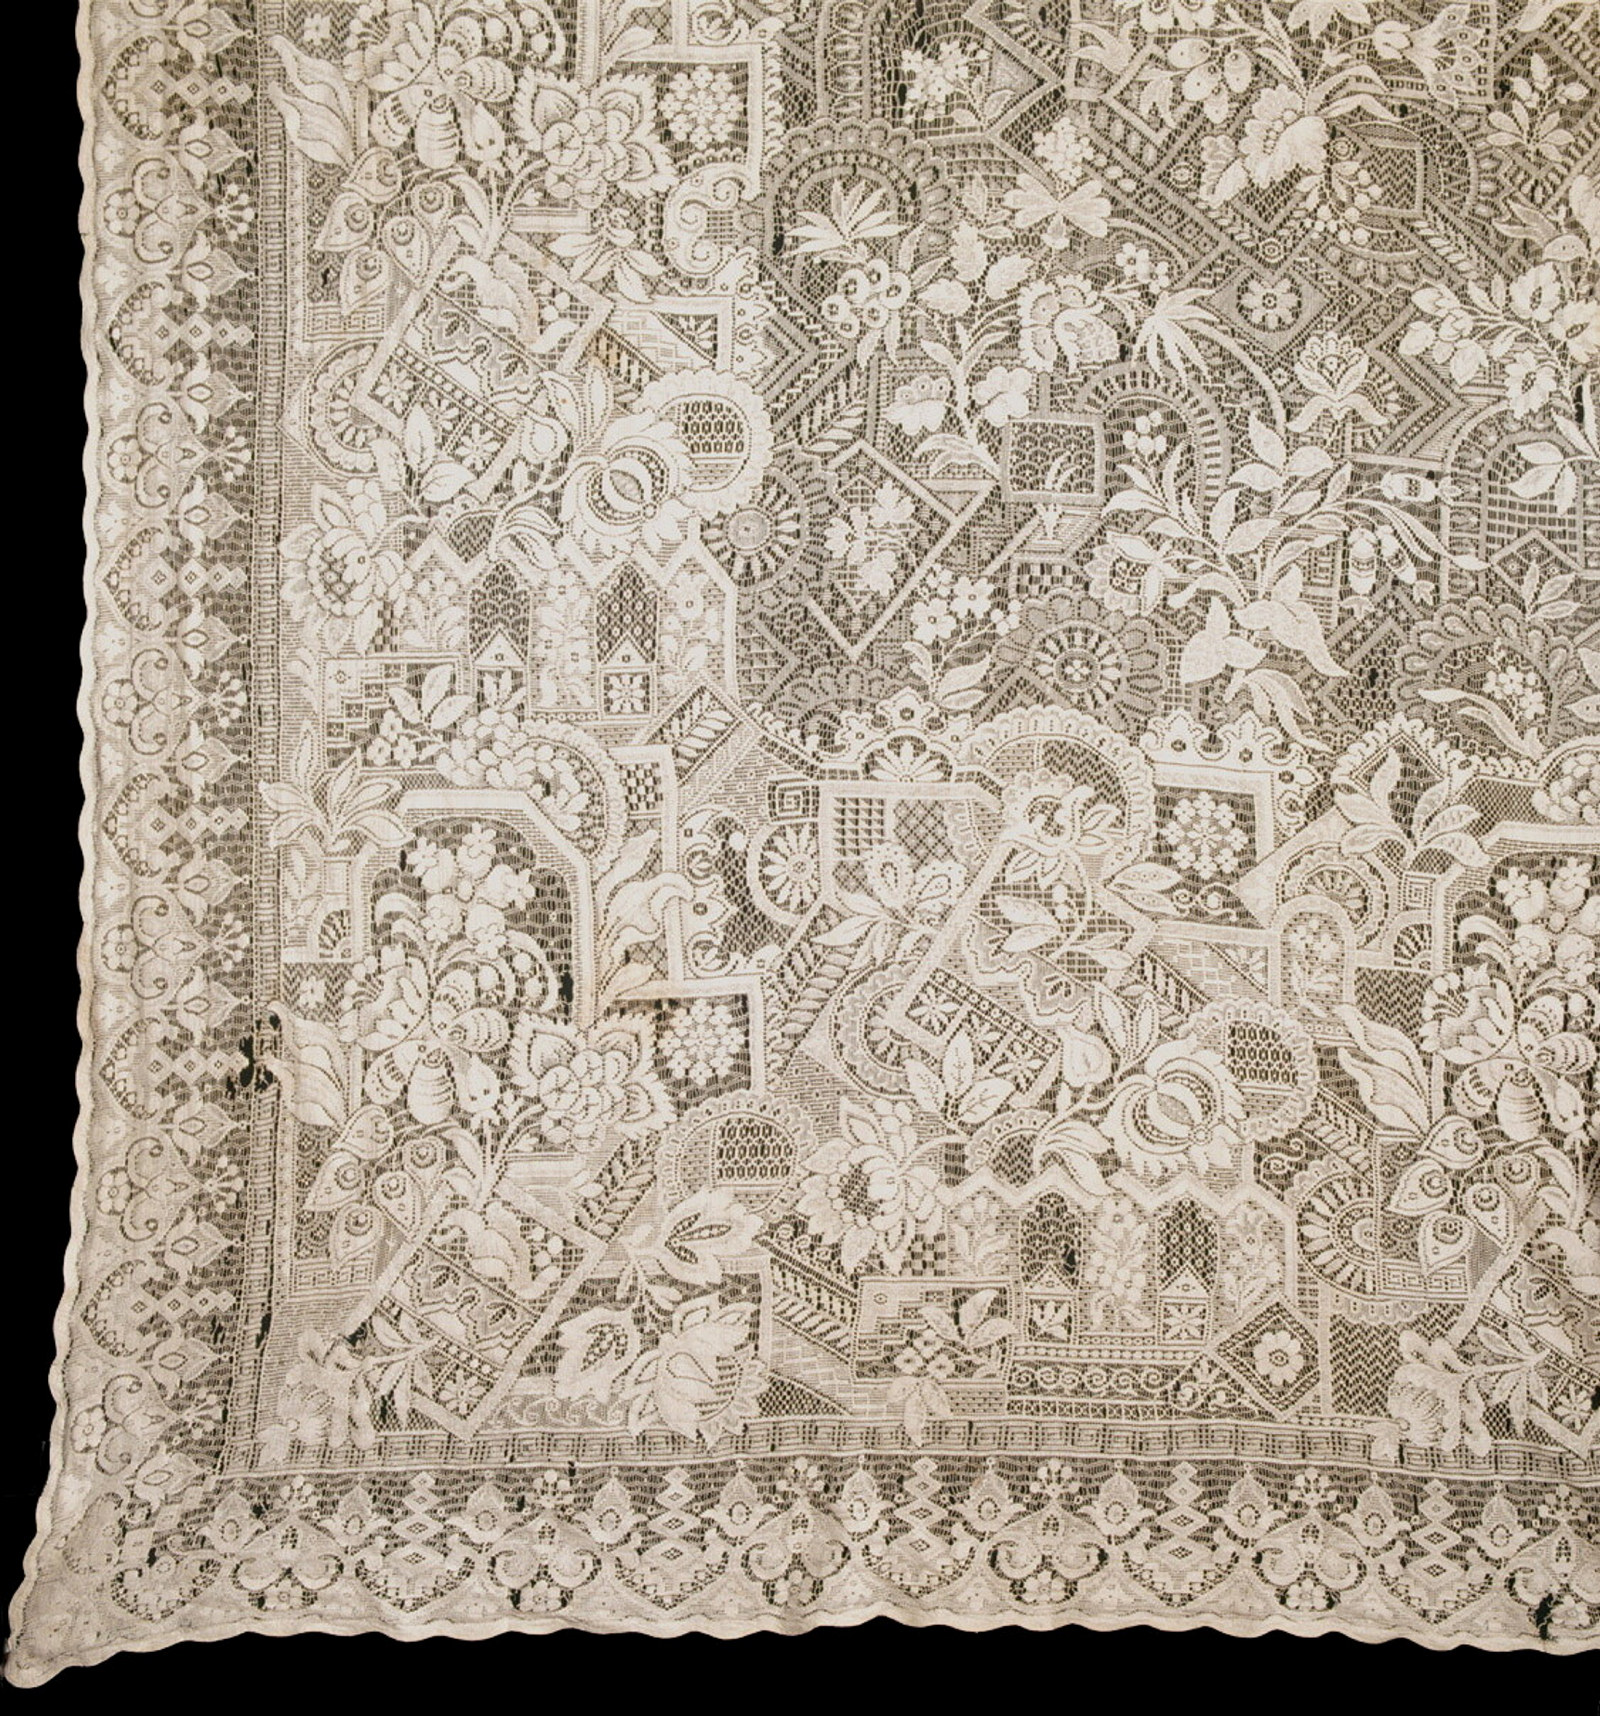 Detail of lace curtain Rouse Hill House 1850-1870